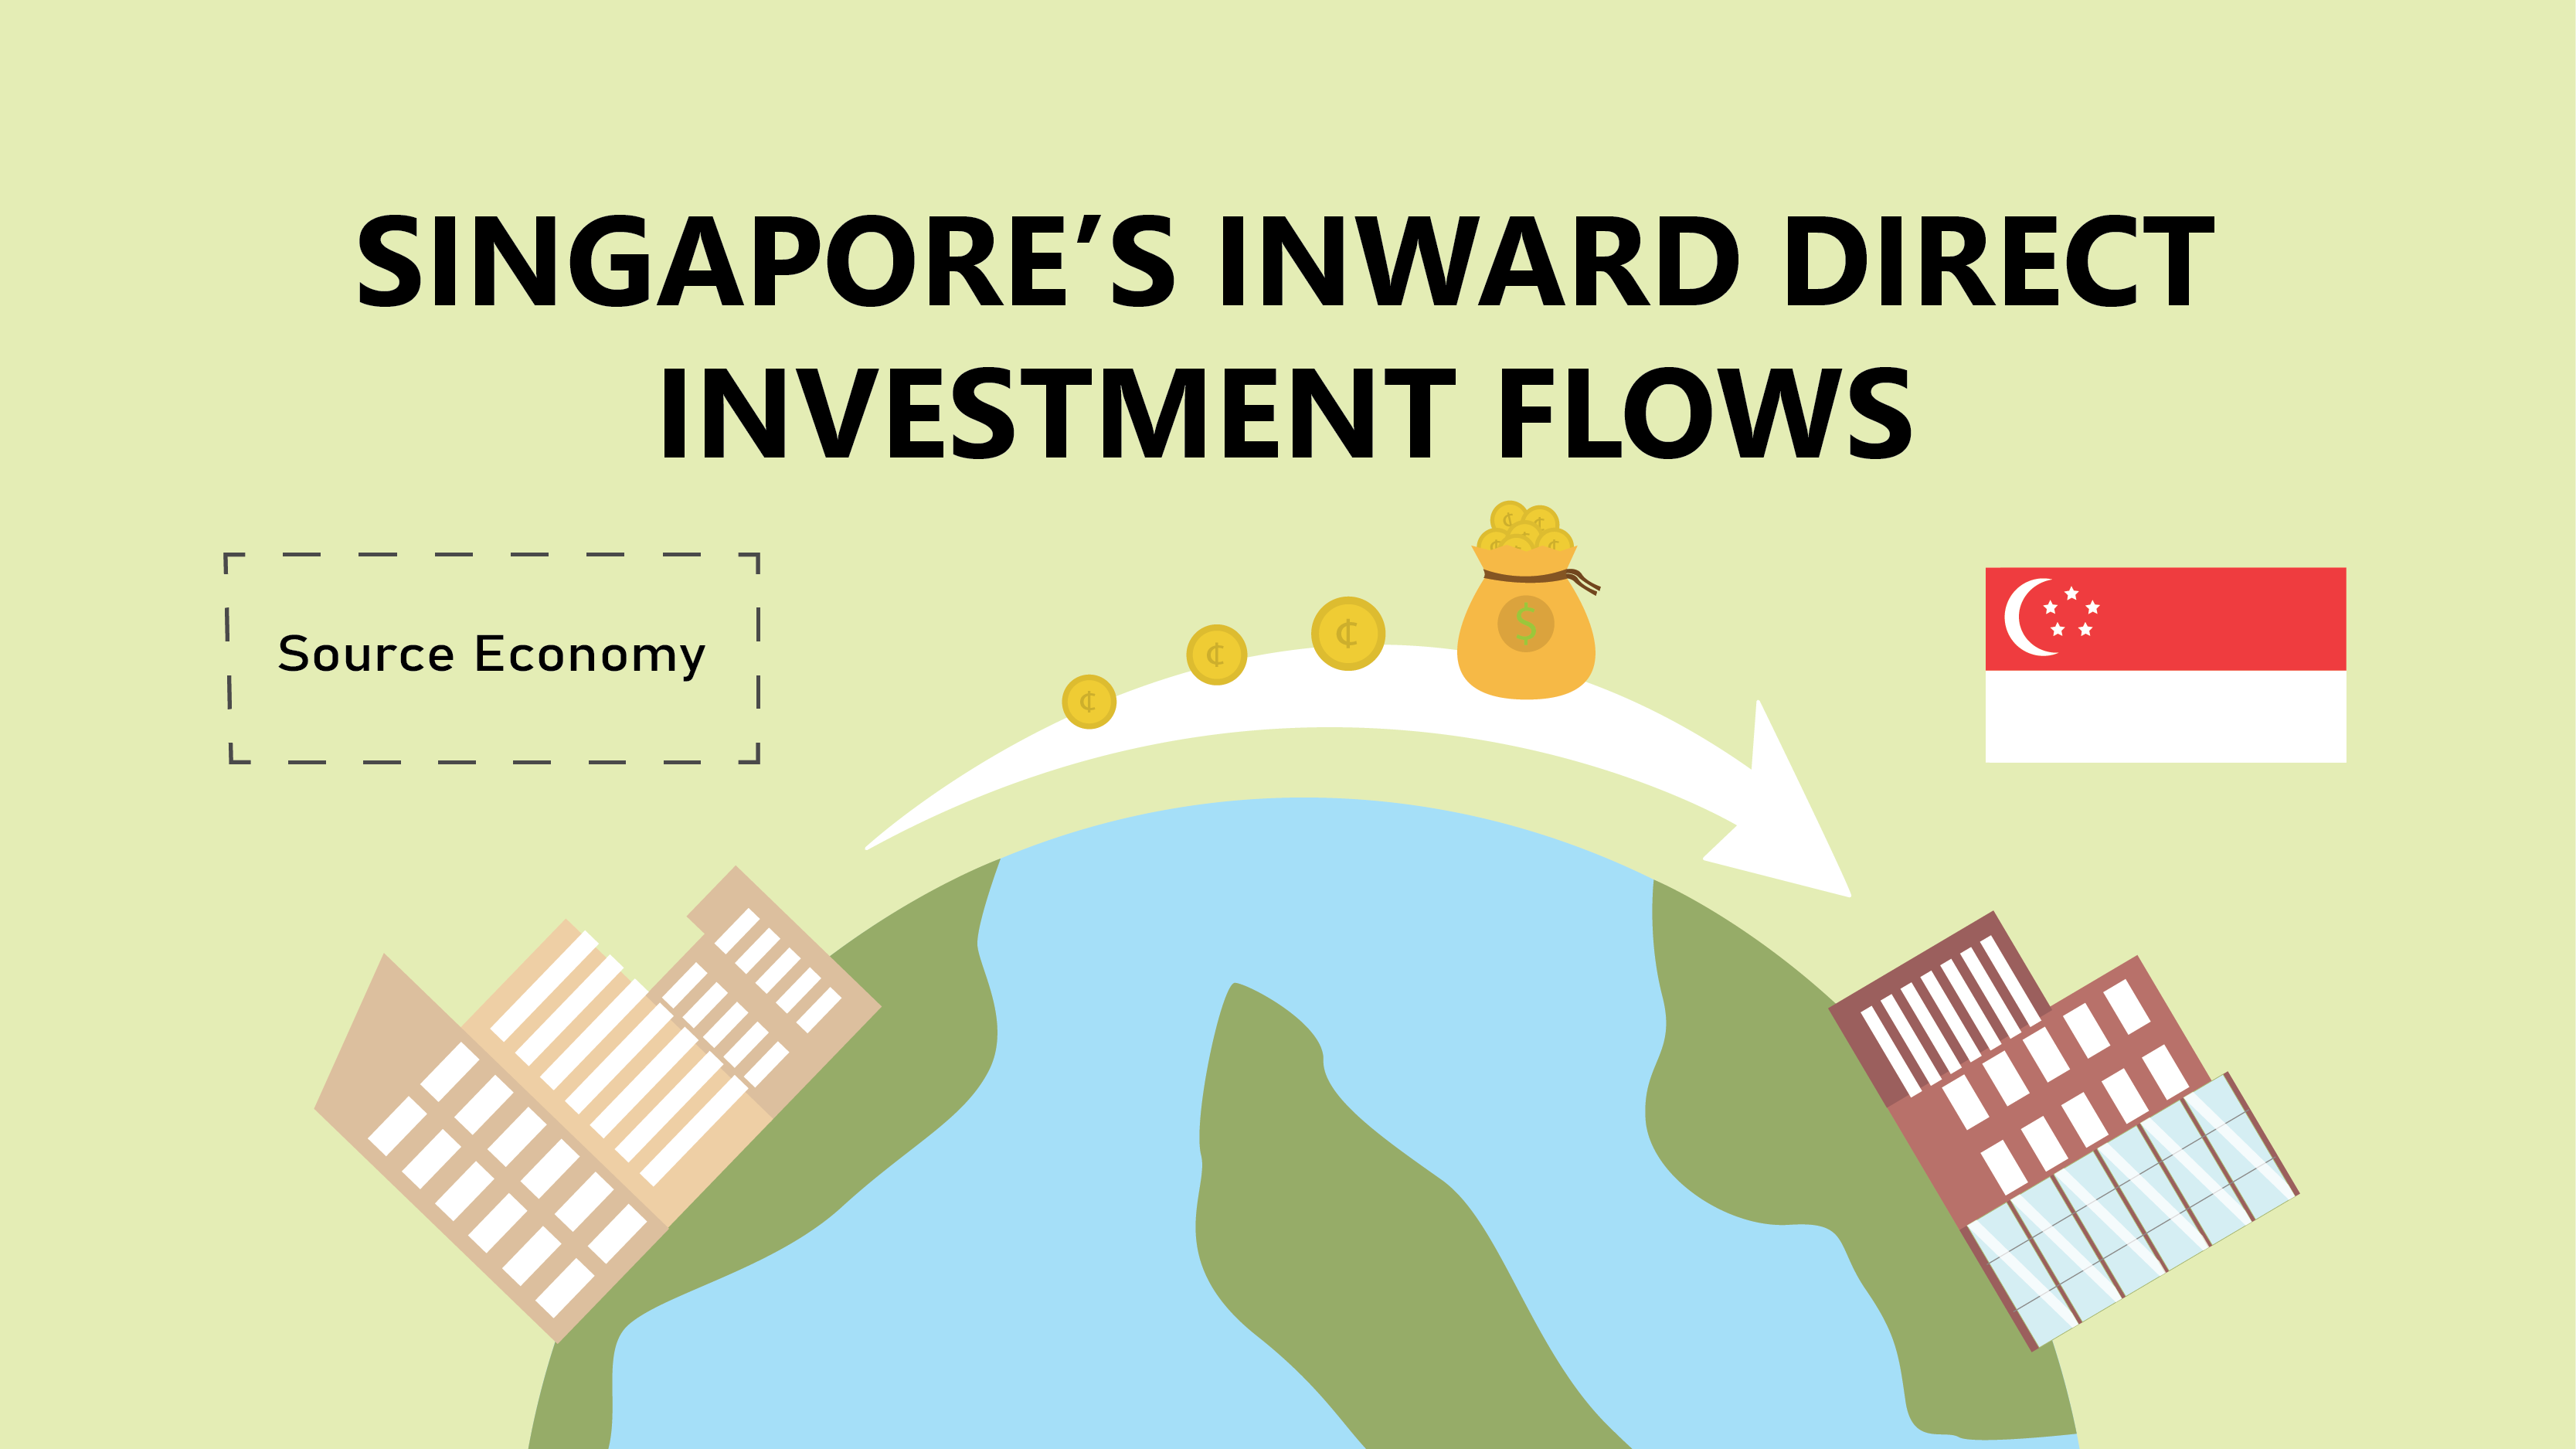 Singapore's Inward Direct Investment Flows